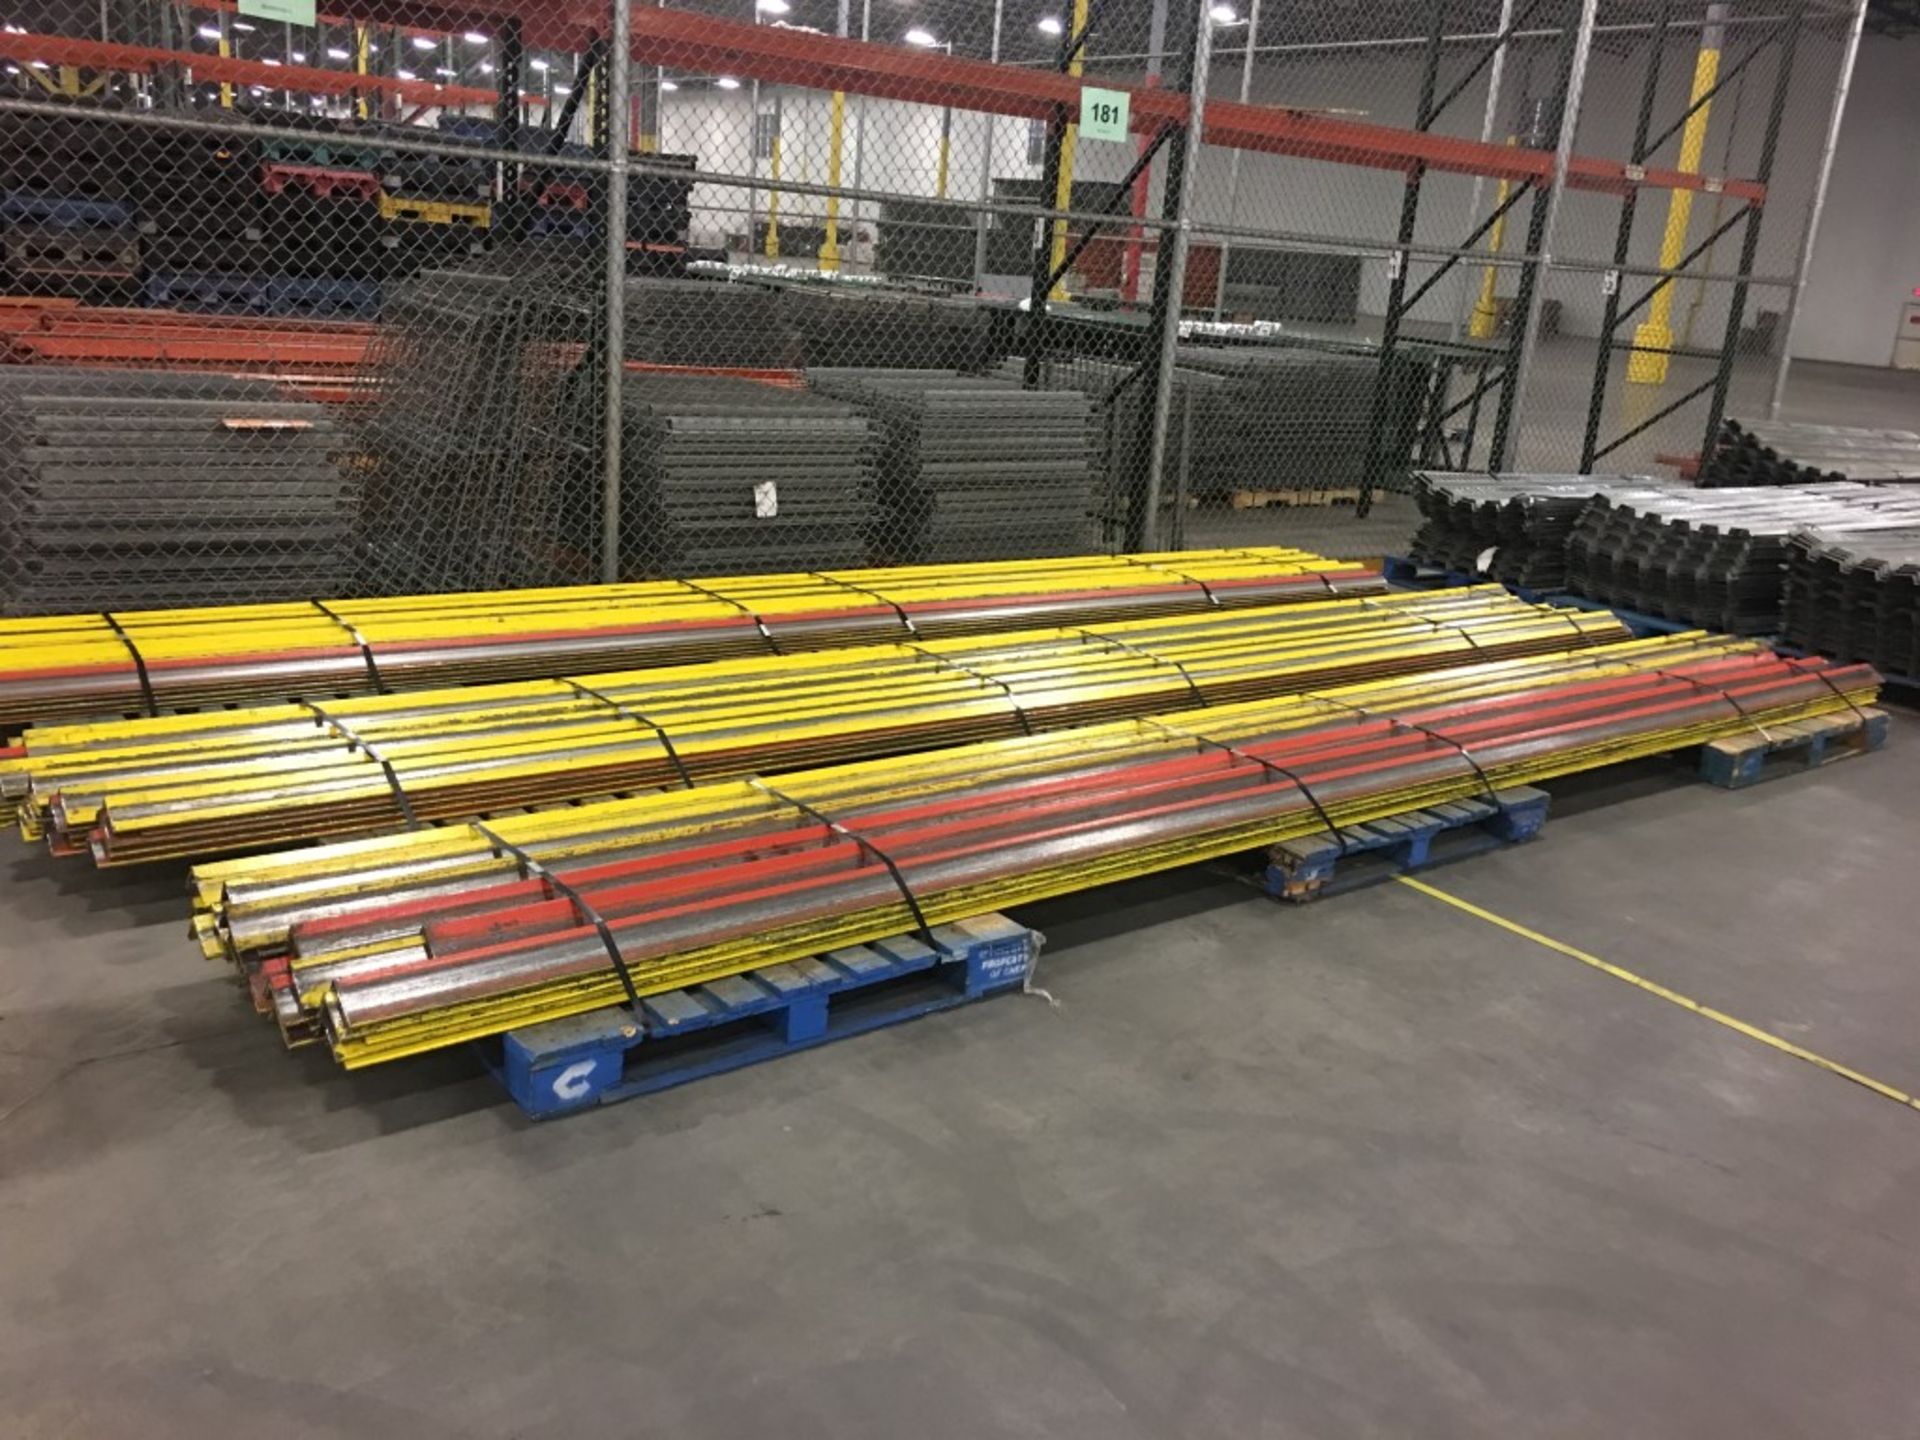 1000 FT OF FLOOR ANGLE GUIDE RAILS 3"" X 4""